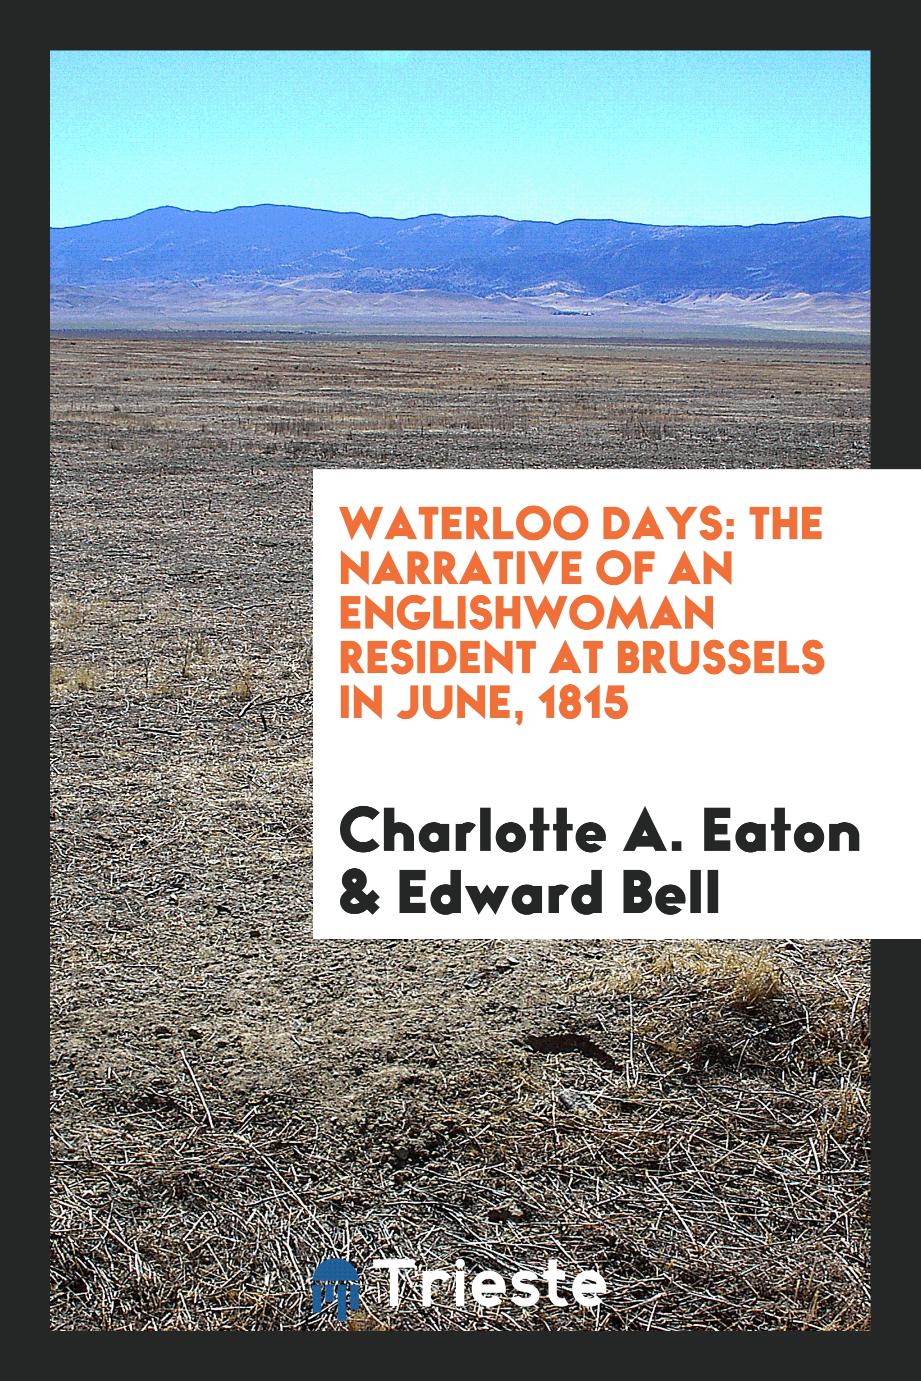 Waterloo days: the narrative of an Englishwoman resident at Brussels in June, 1815